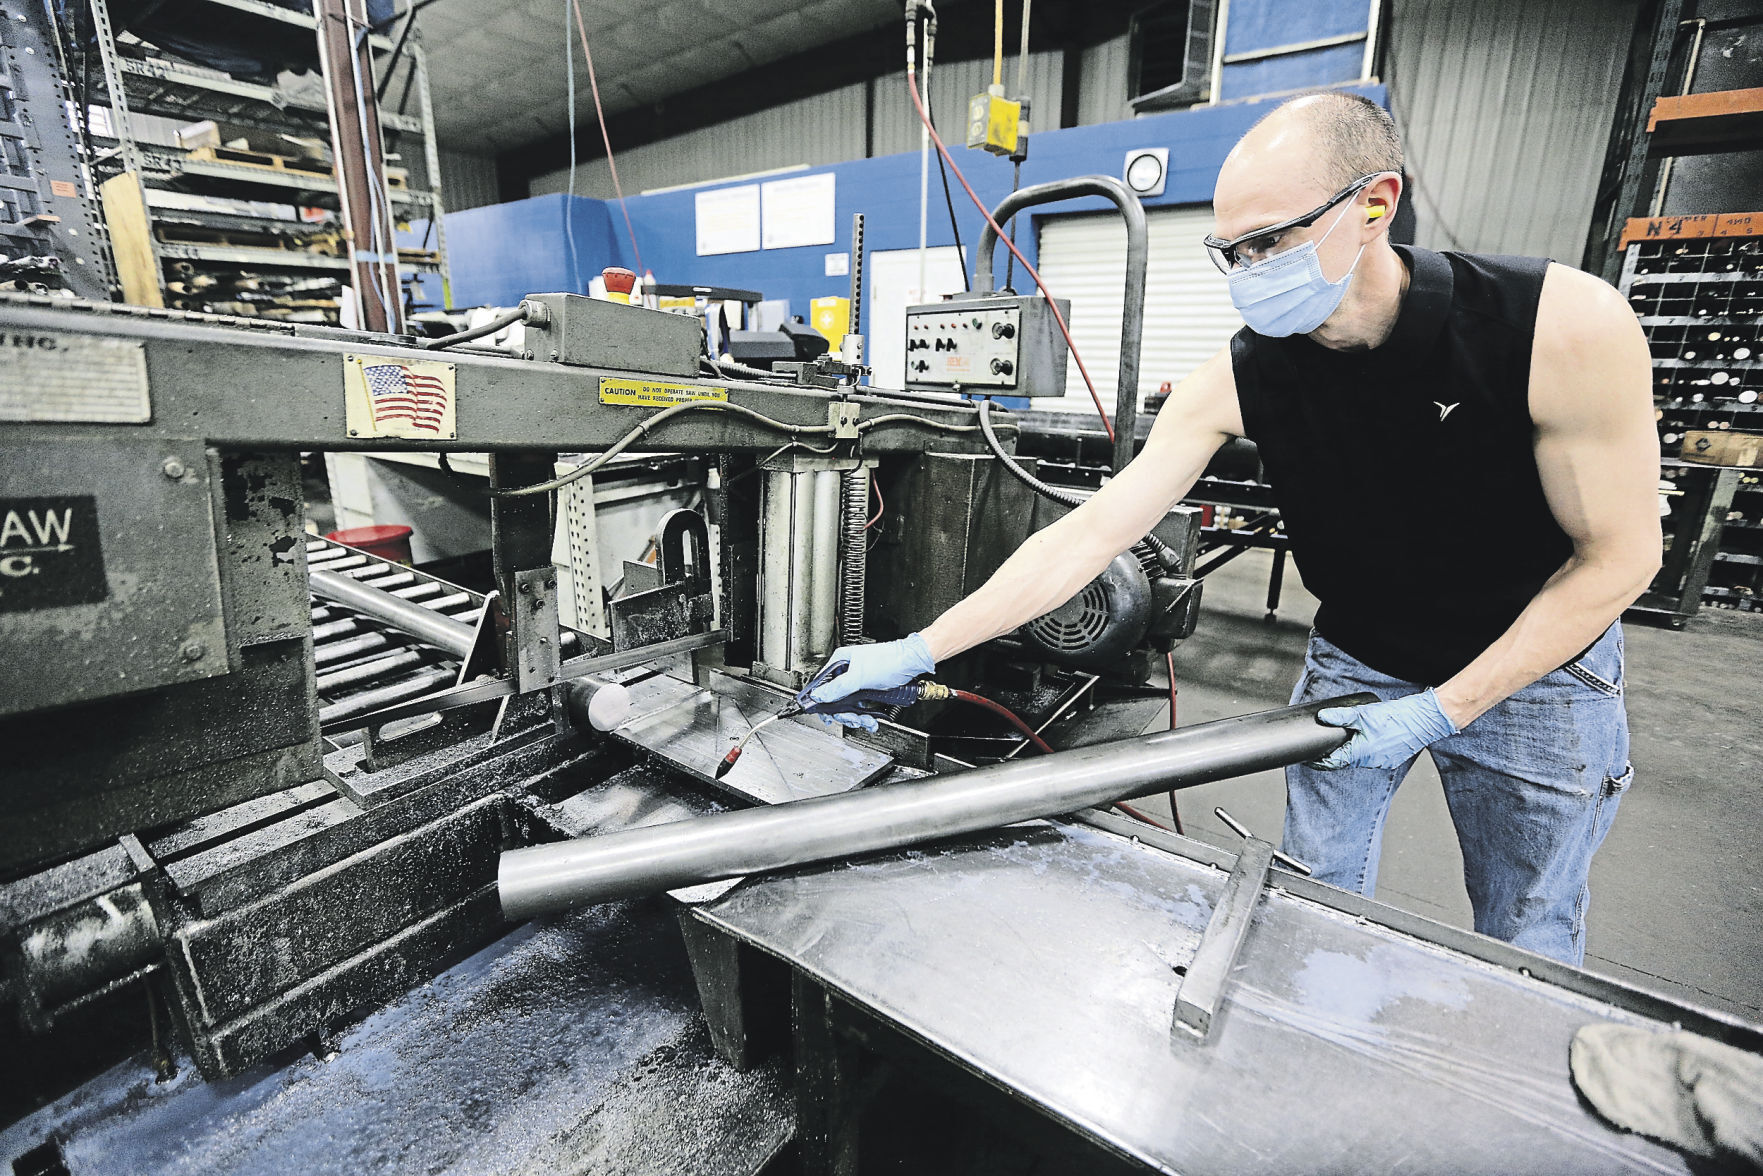 Darrell Schmitt, a saw operator at Dubuque Screw Products, works on a product. The company started 75 years ago. It moved to its Chavenelle Road site in 2008.    PHOTO CREDIT: Dave Kettering